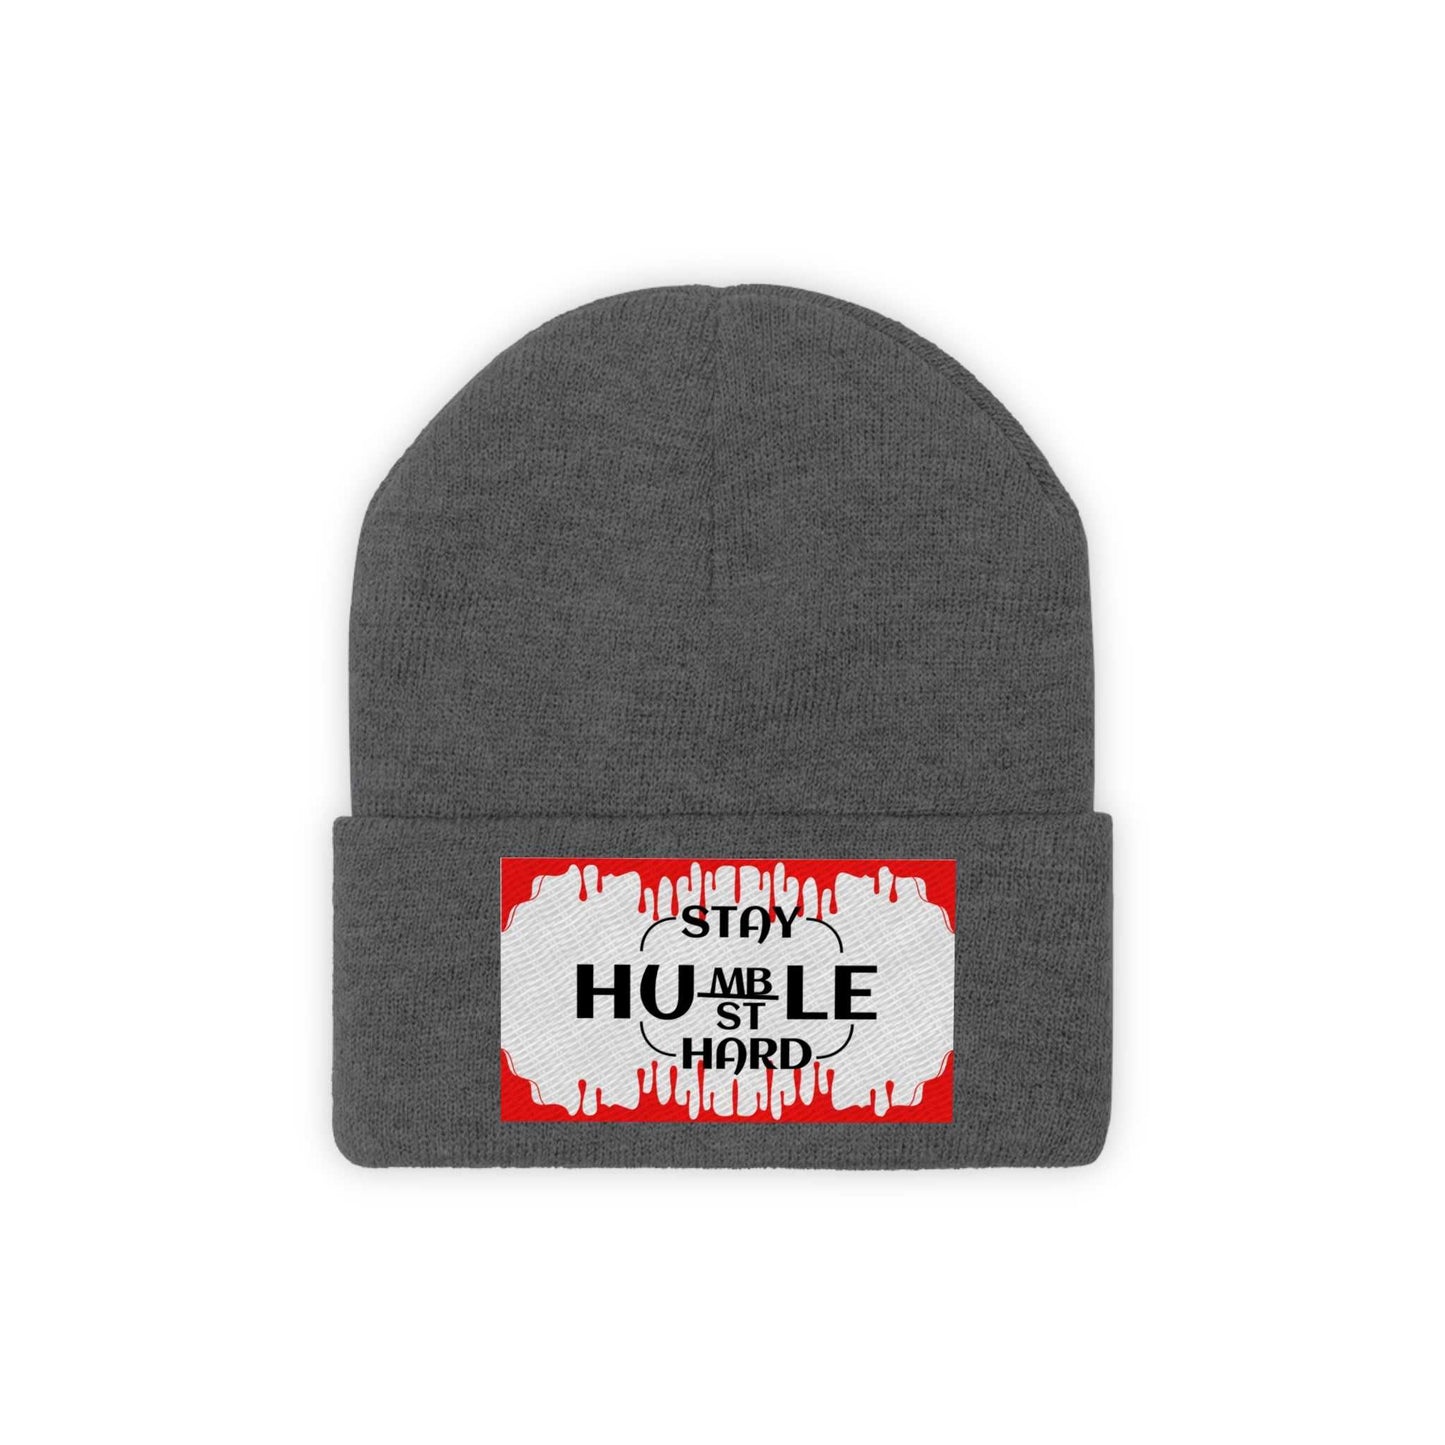 Stay Humble Hustle Hard Knit Beanie Motivation on the Go!! Hats Good Vibes Daily Lab 18